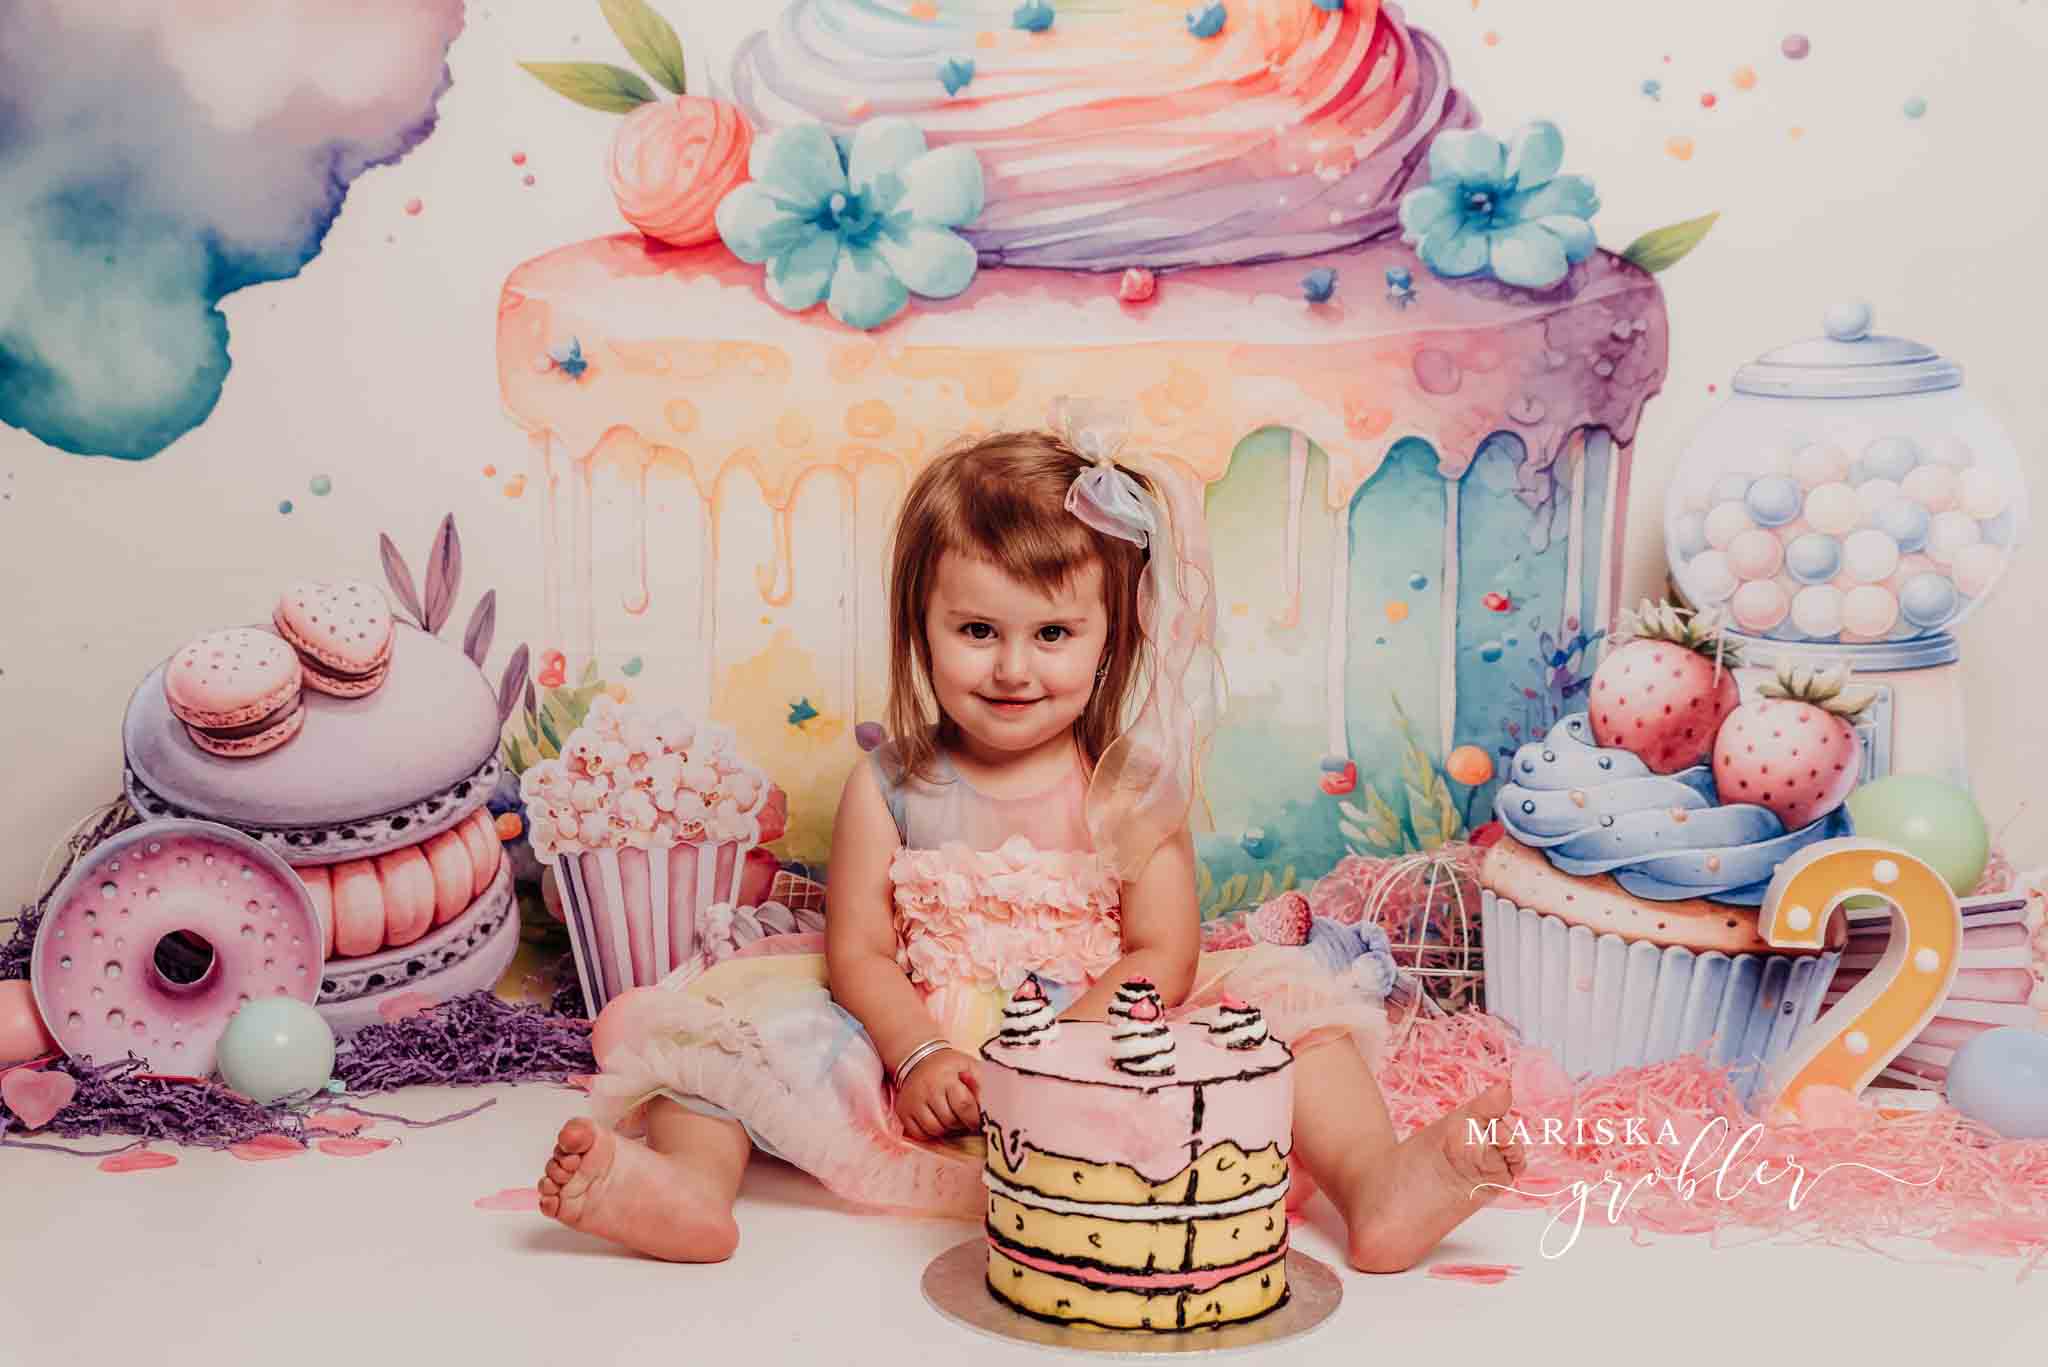 Kate Rainbow Colorful Cake Floral Backdrop Designed by Patty Robert